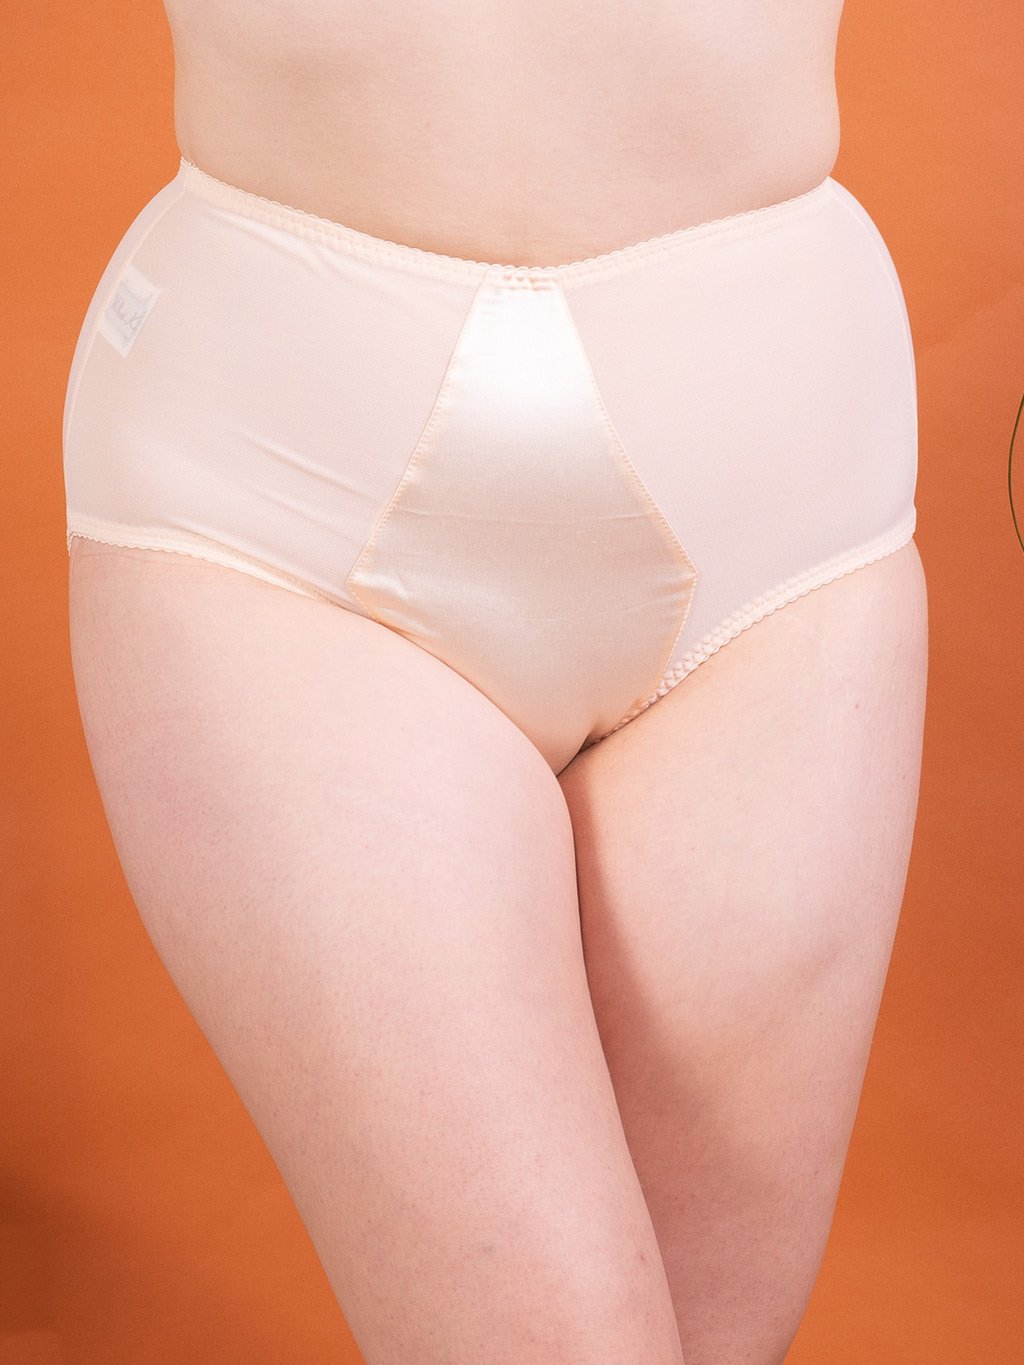 Peach Harlow Knickers by What Katie Did.  Made from power mesh for comfort and support with satin detailing at the front.